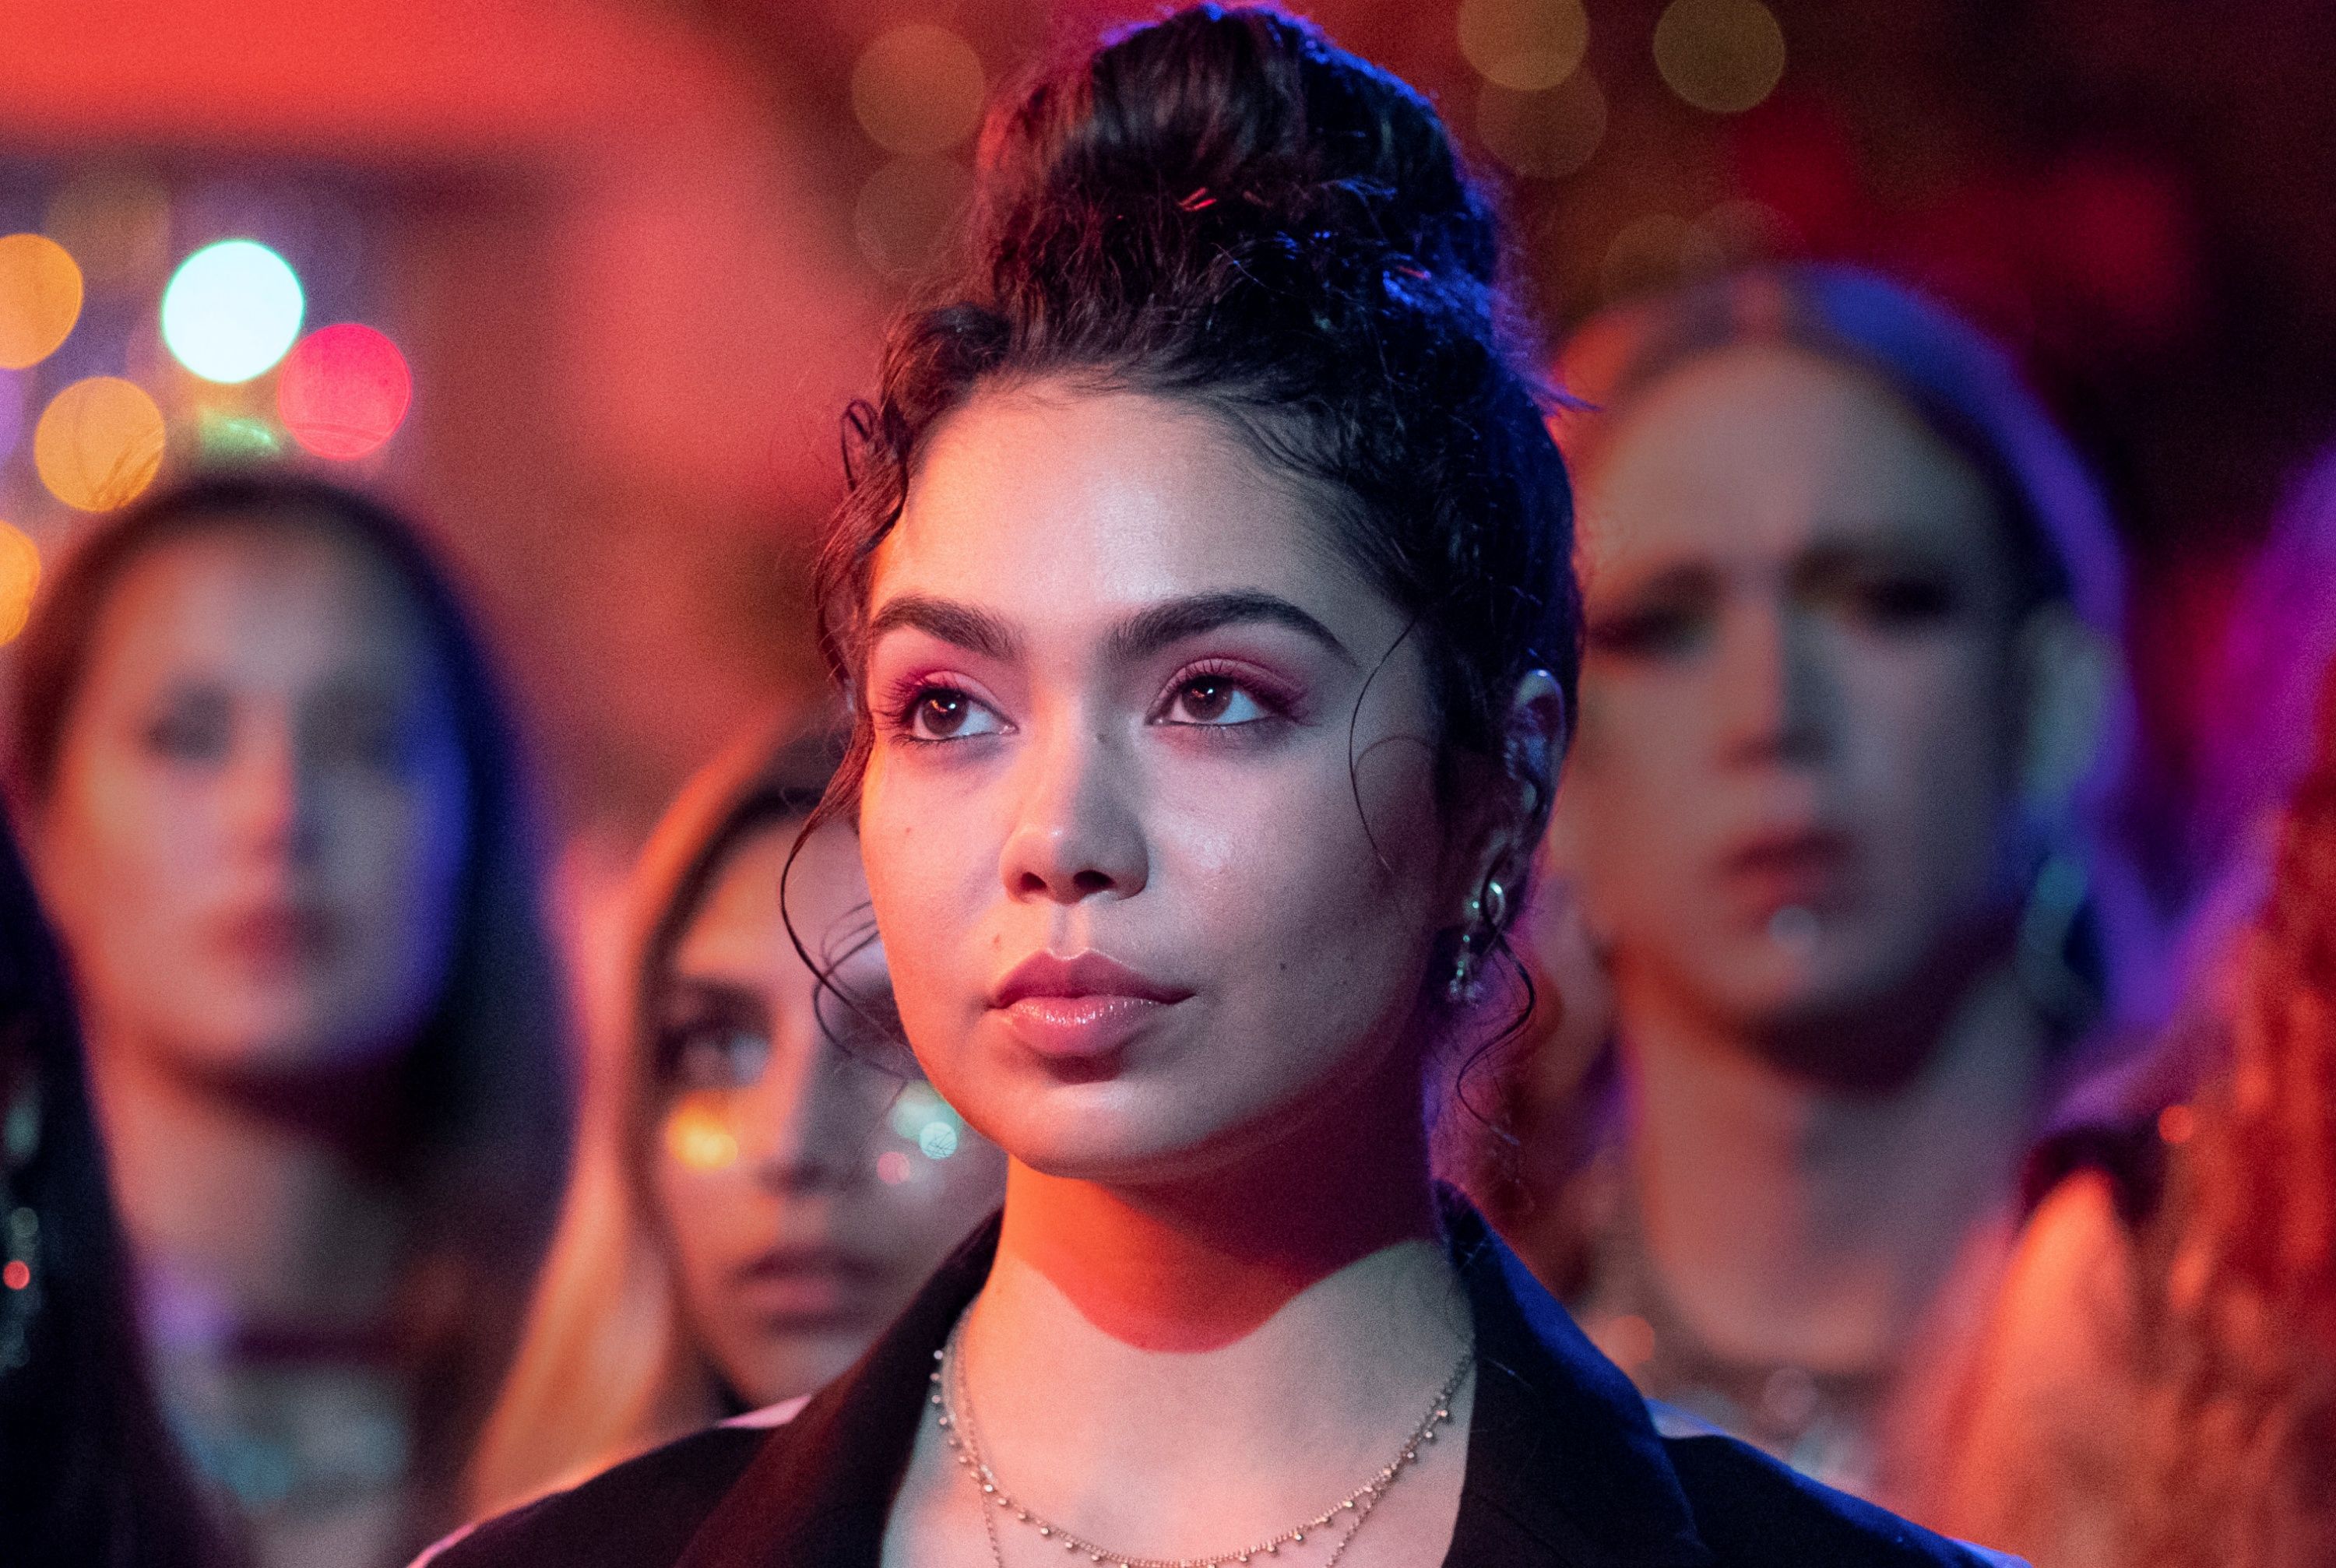 darby-and-the-dead-auli'i-cravalho-02